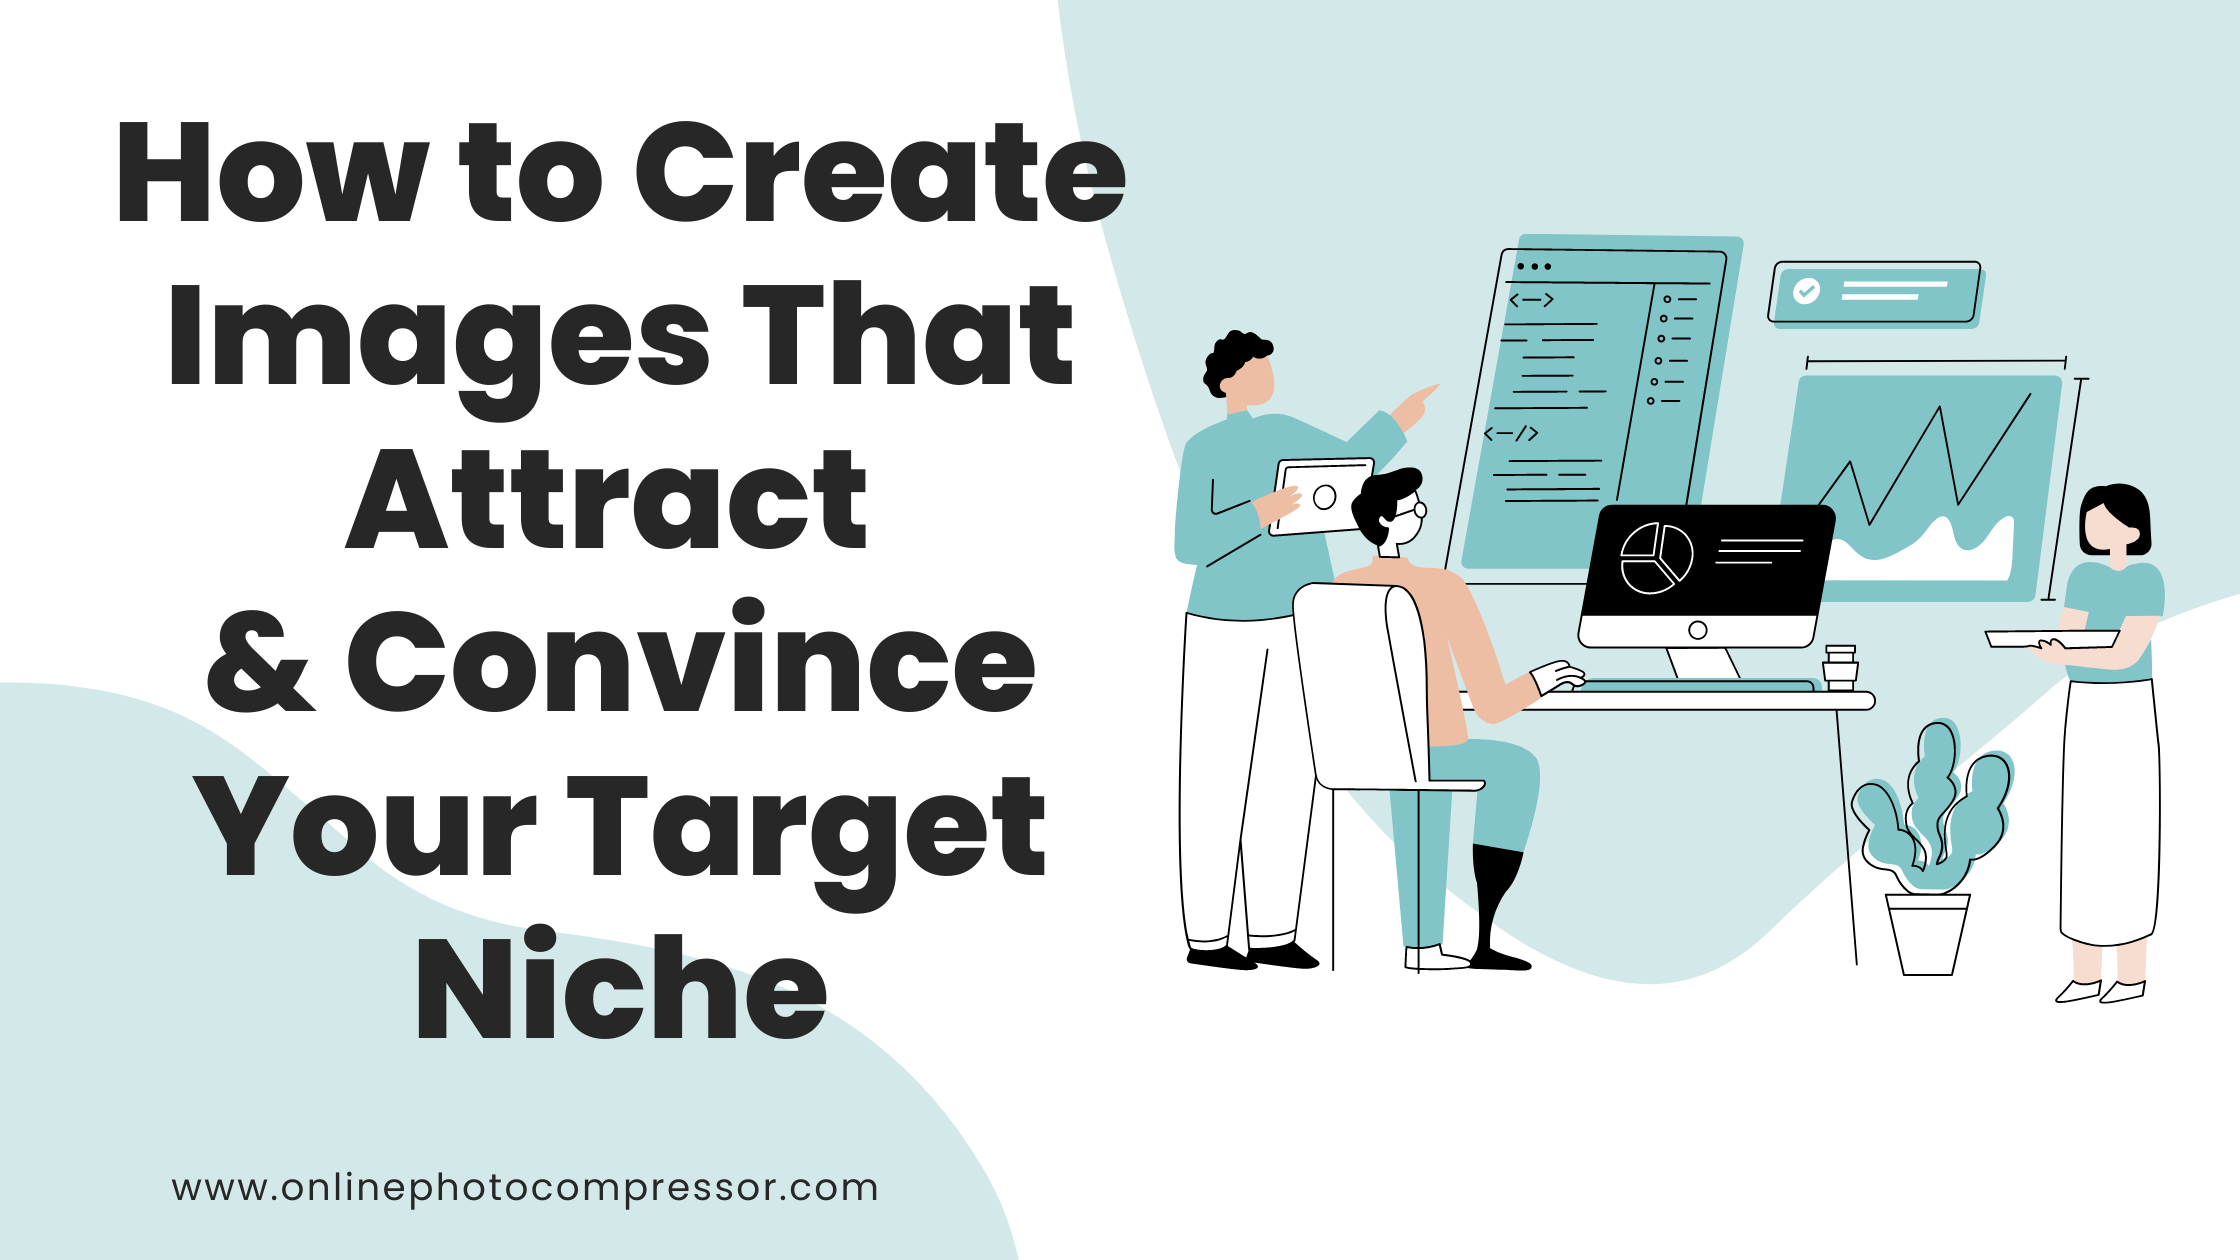 How to Create Images That Attract & Convince Your Target Niche